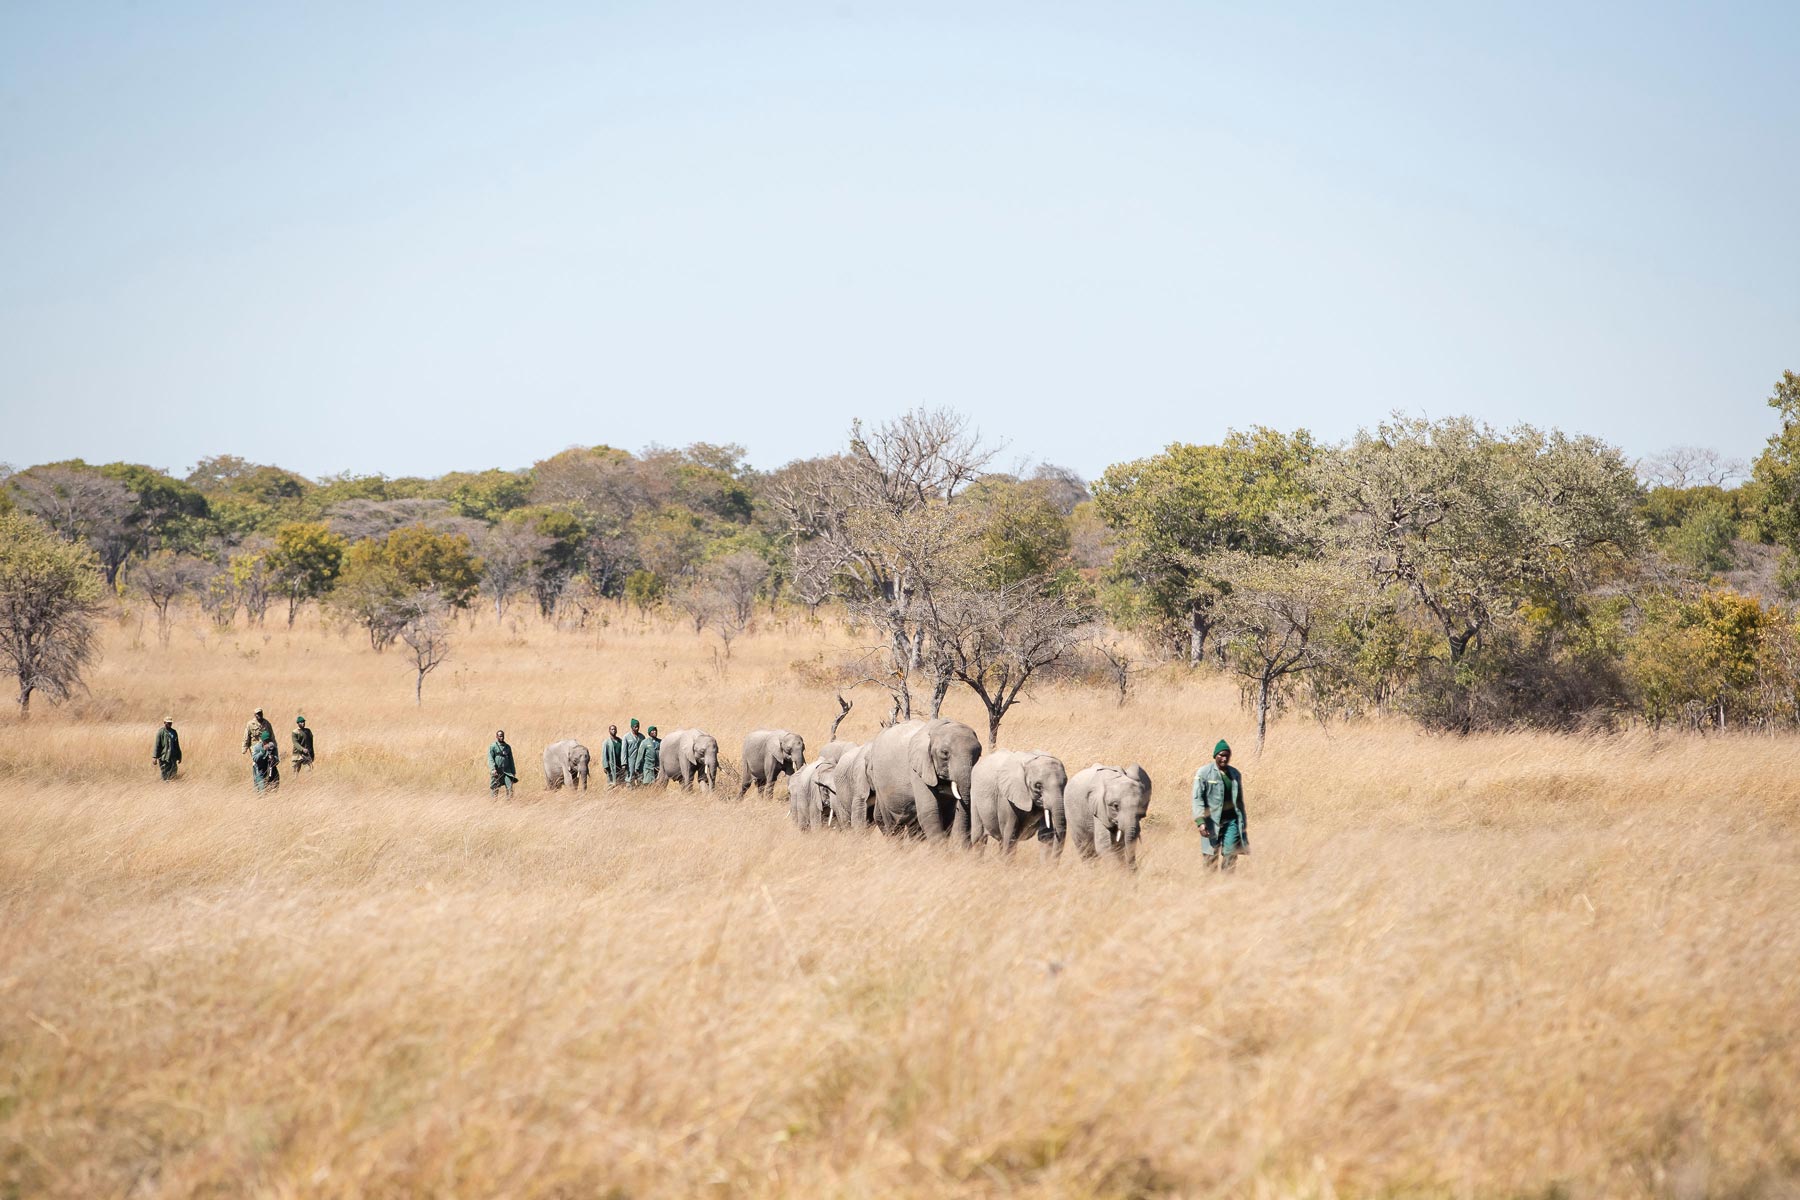 Game Rangers International keepers and rangers walking with elephants in Zambia.